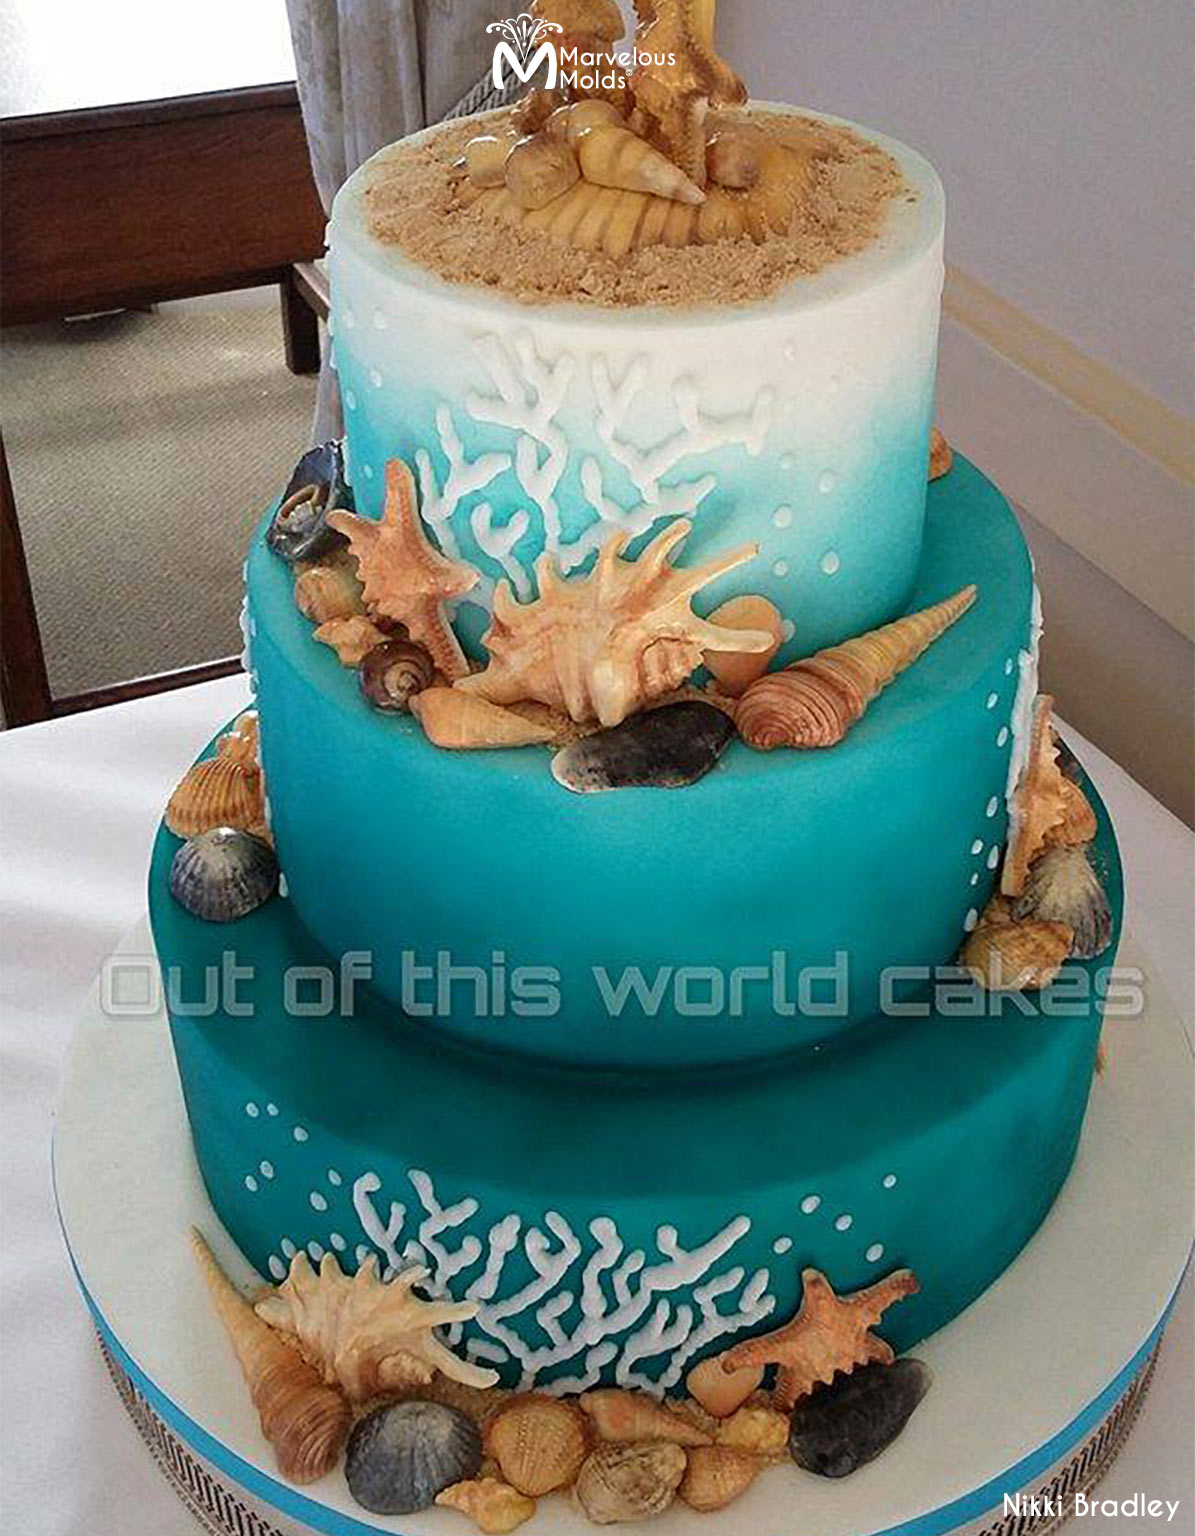 Sea Foam Blue Wedding Cake Decorated with the Marvelous Molds Lambis Shell Silicone Mold